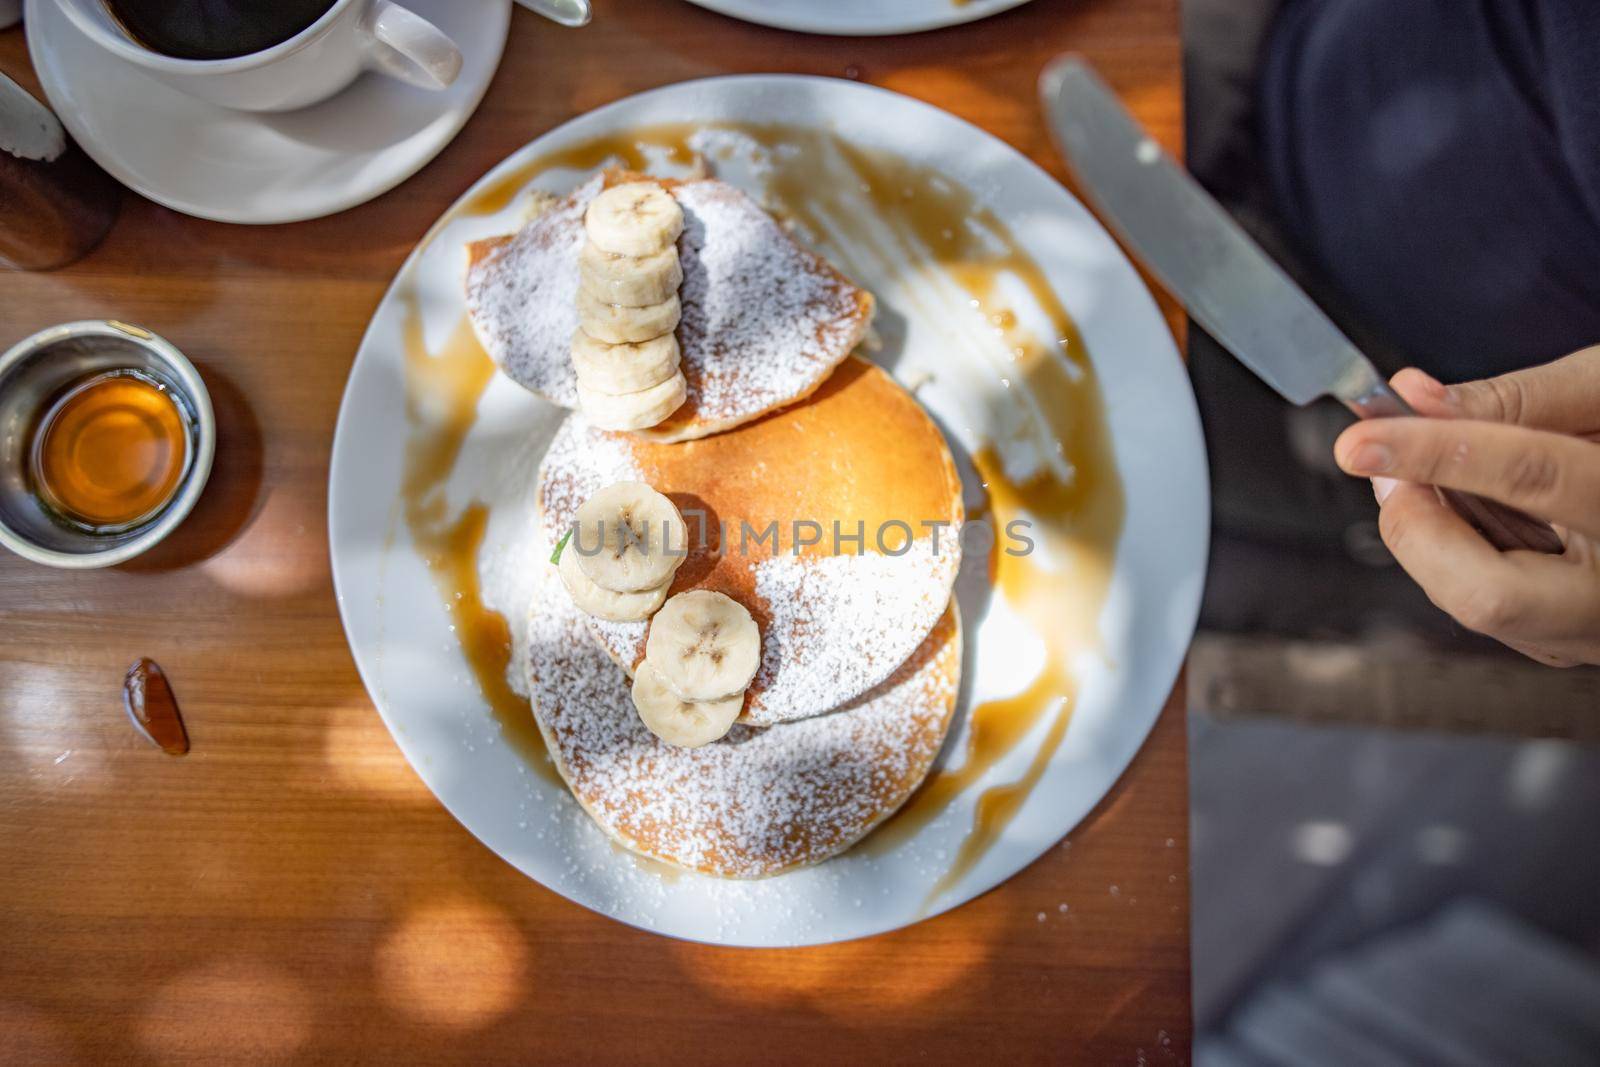 Top view of hand holding knife above tasty pancakes with powdered sugar, syrup, and banana slices. Sunlight on delicious sugary dessert with fruit on wooden table. Sweet breakfast and food